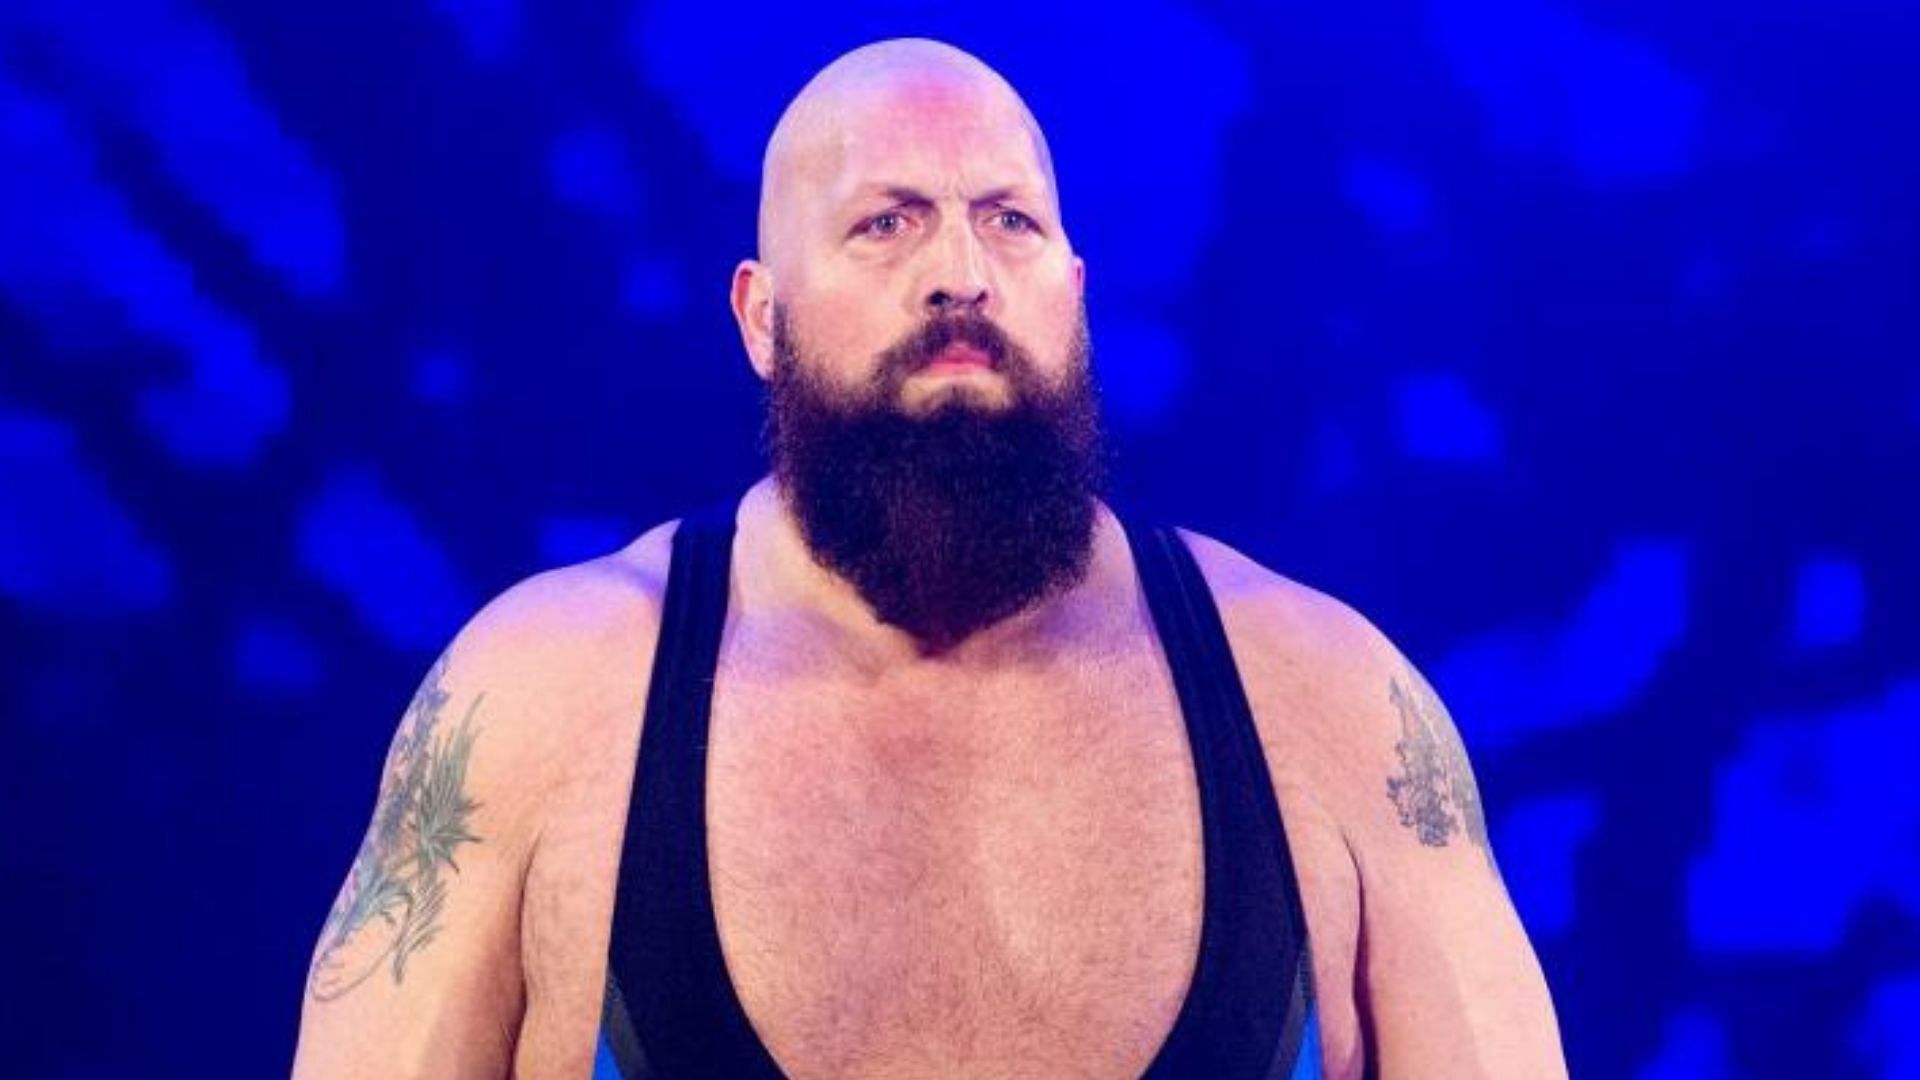 Former WWE and former AEW superstar Big Show